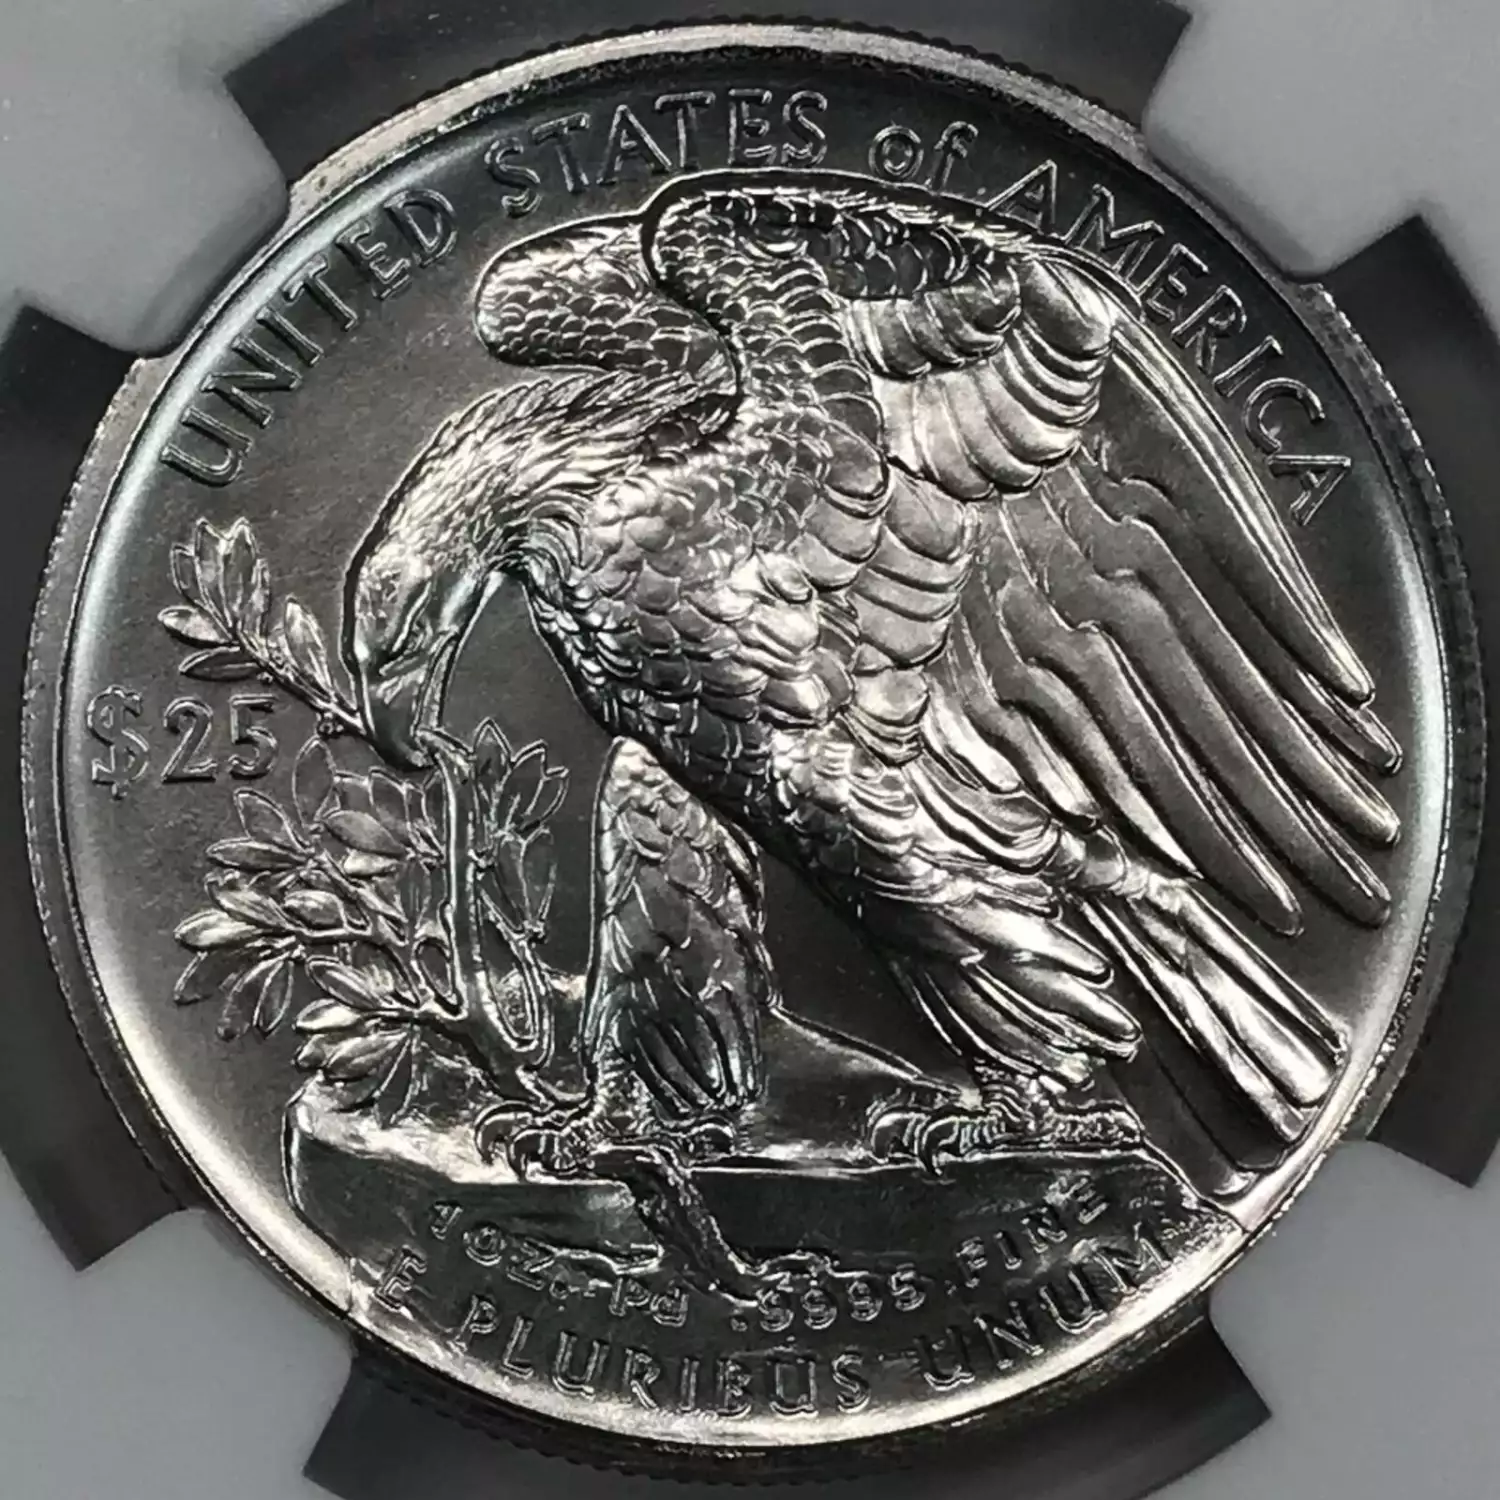 2017 HIGH RELIEF EARLY RELEASES FIRST PALLADIUM US COIN  (3)